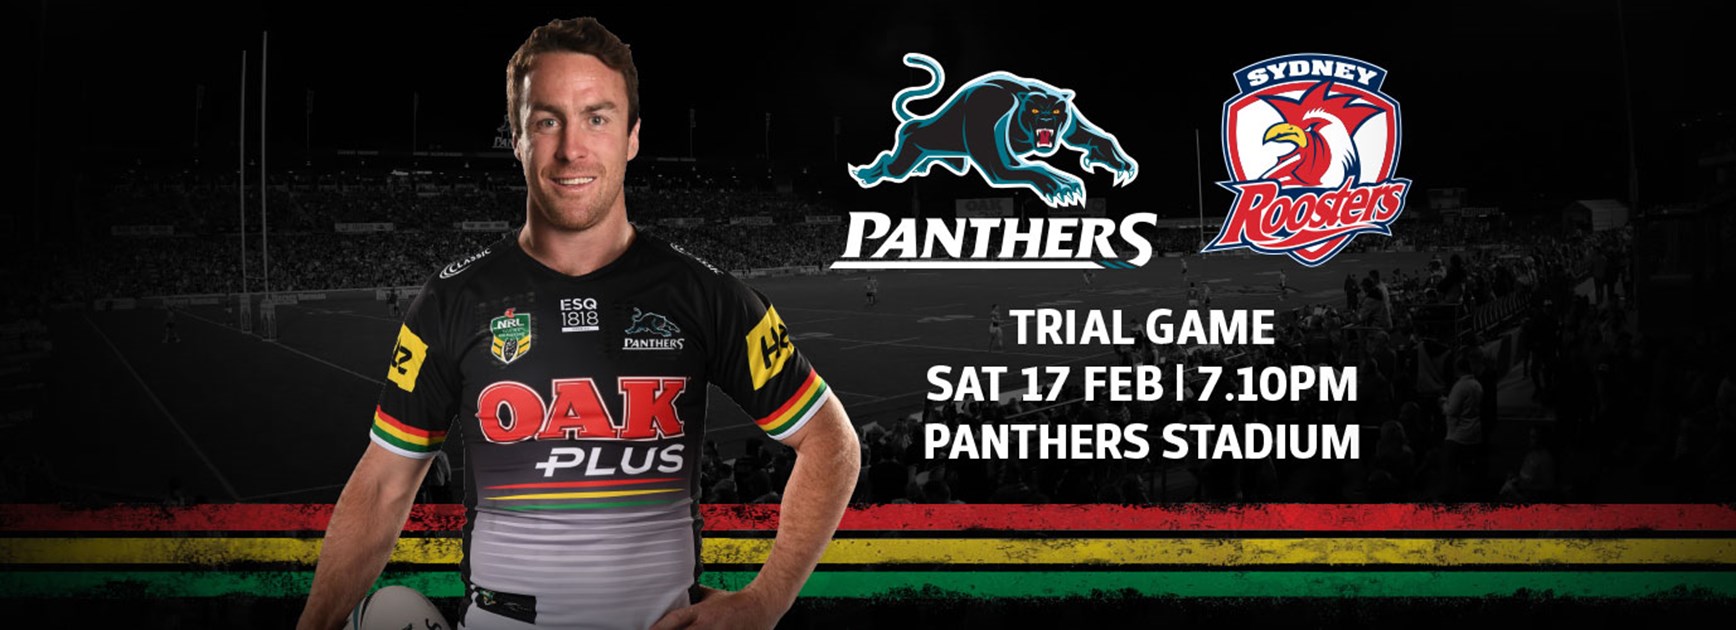 Gameday Info: Panthers v Roosters Trial